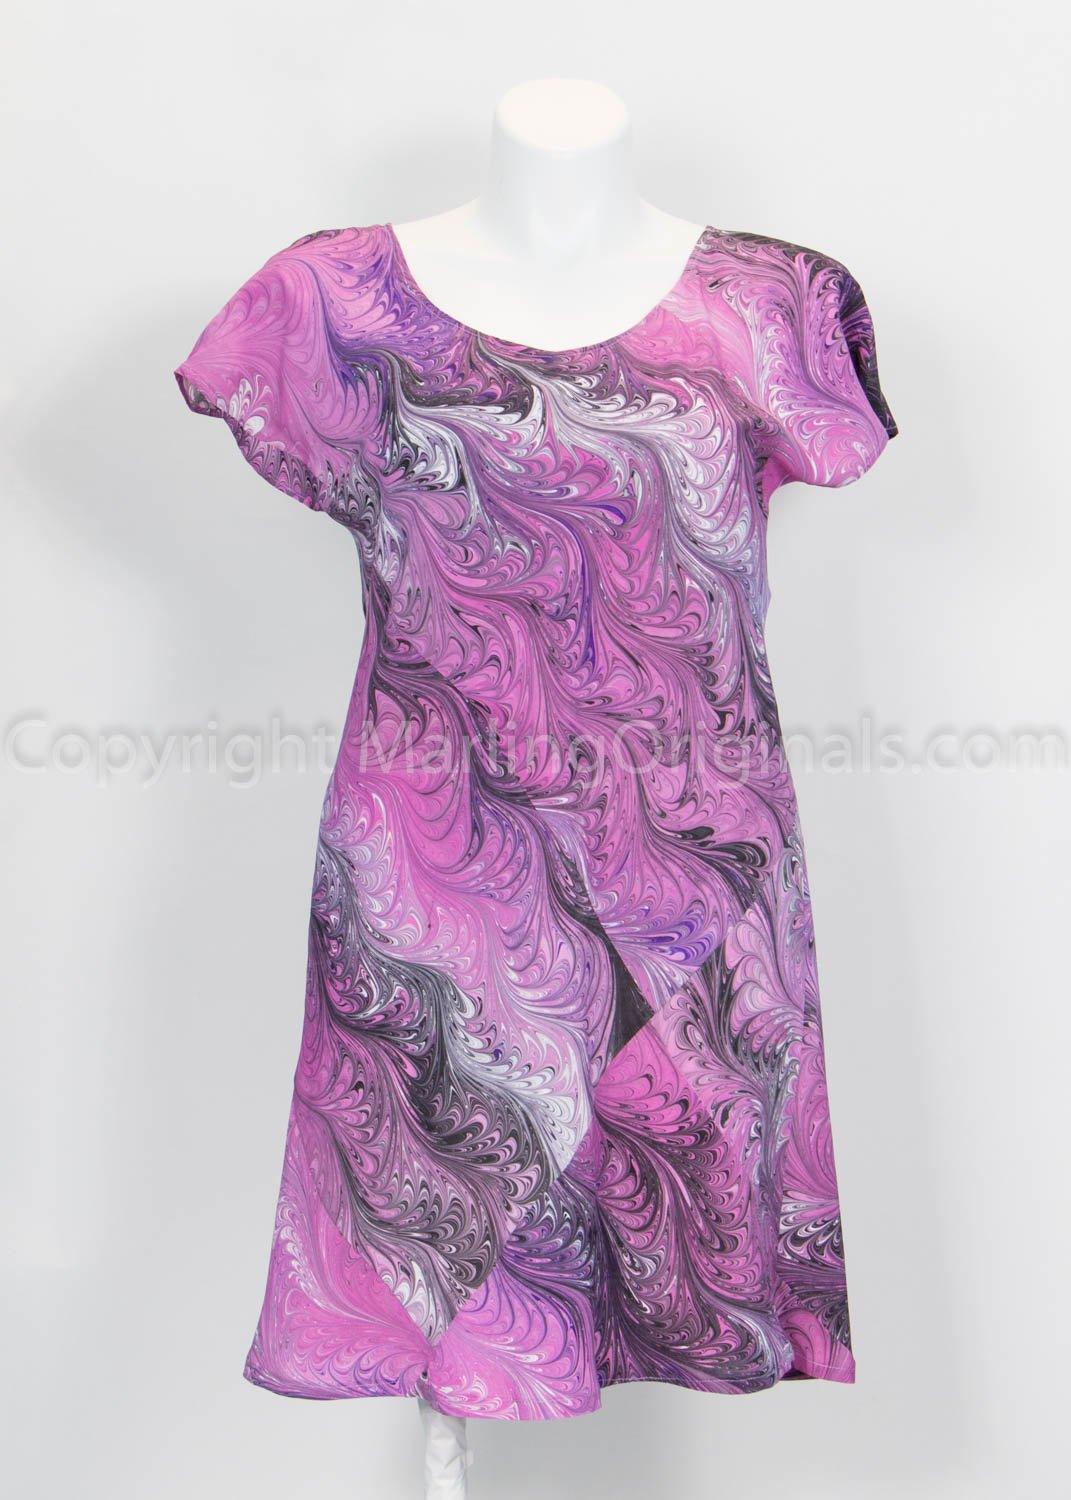 marbled dress cut on the bias in bright pinks, black and white